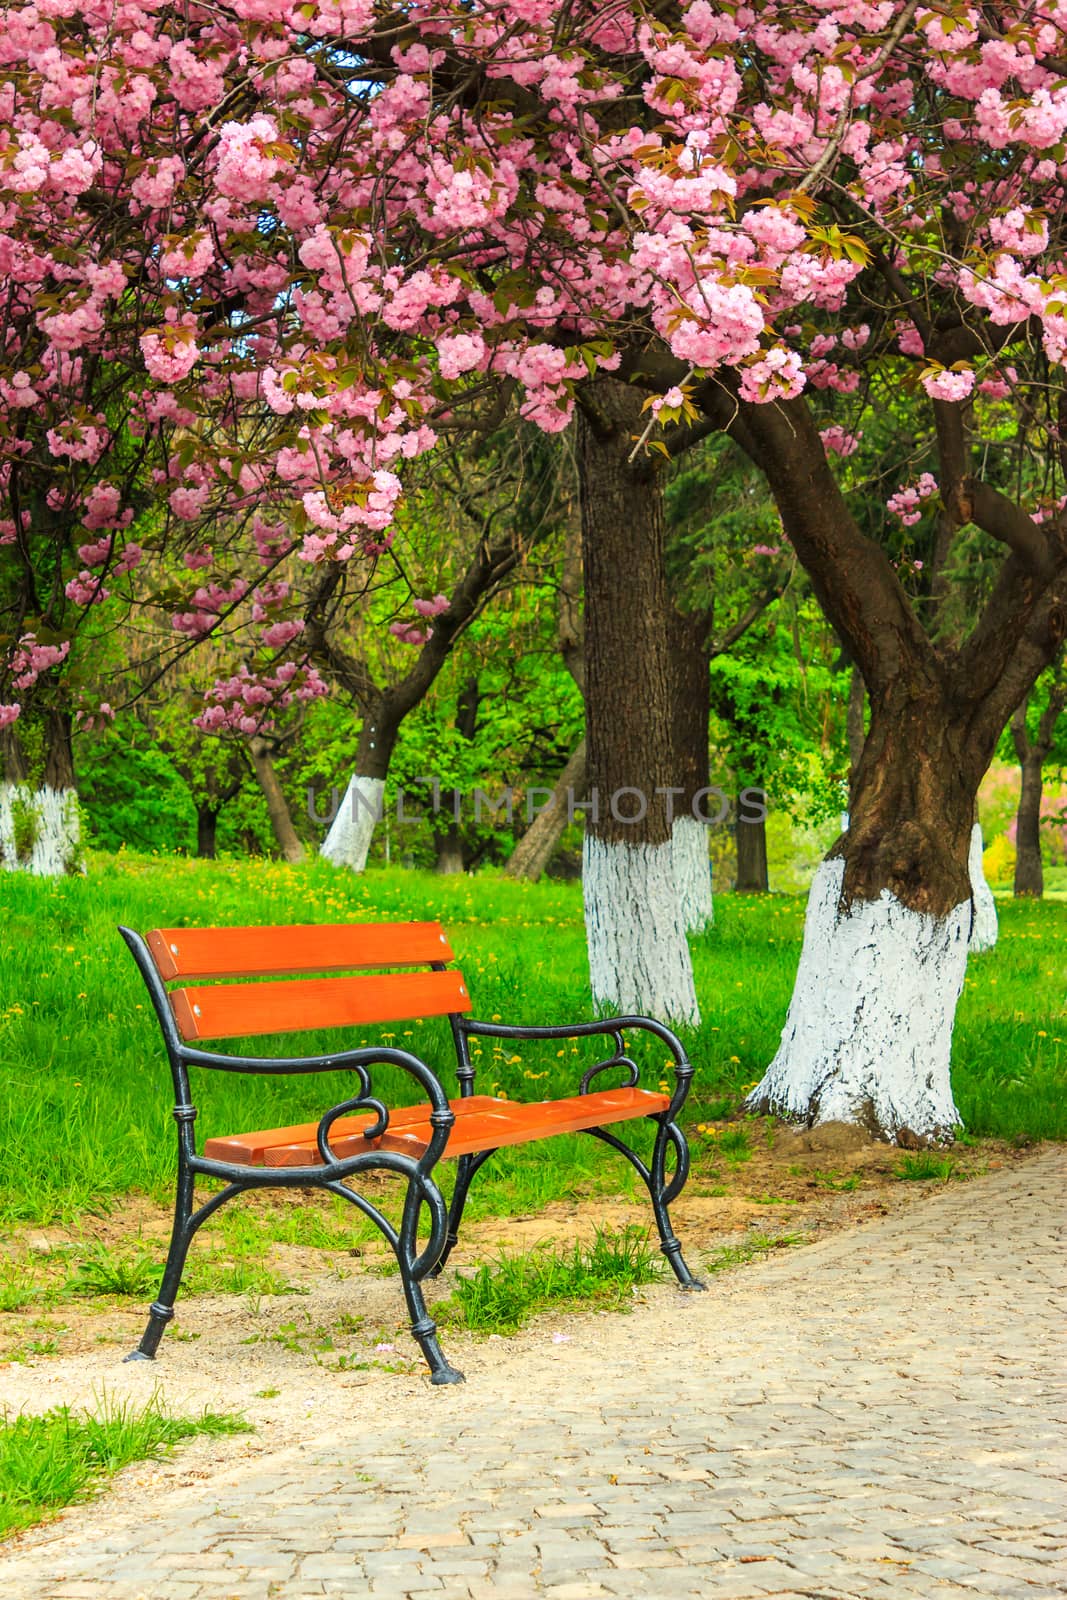 bench on the pavement in the park on a background of grass and sakura tree